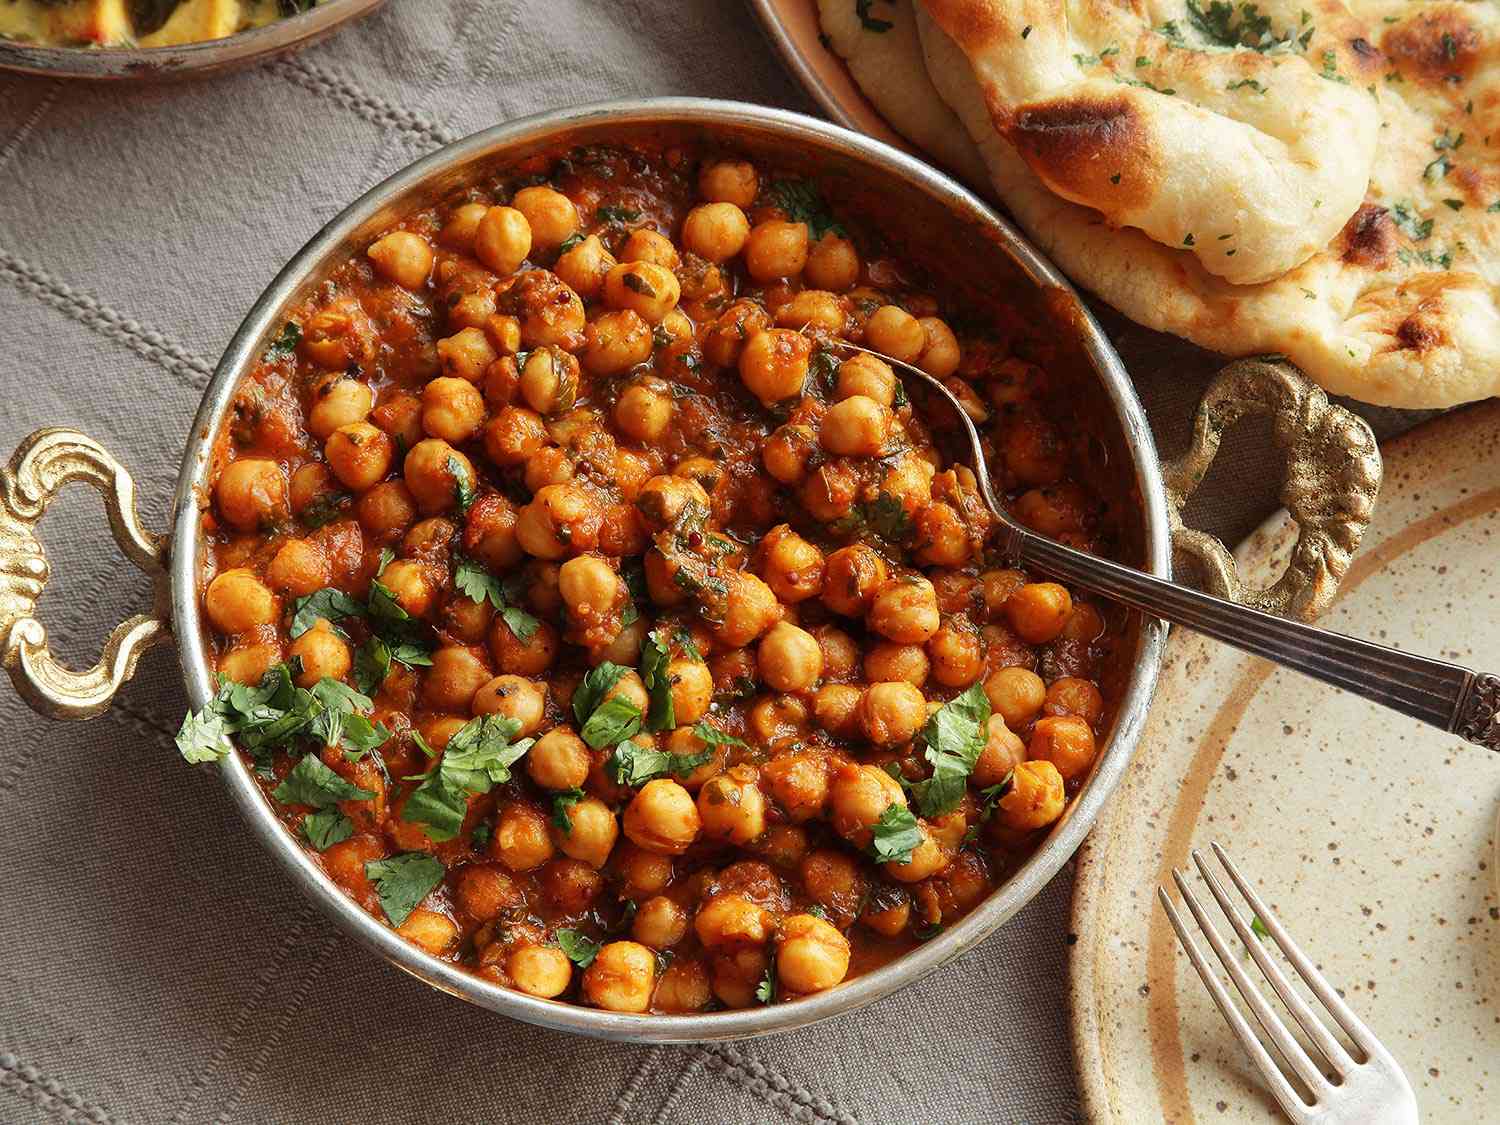 A close-up of a steaming bowl of chana masala, garnished with fresh coriander leaves and a wedge of lemon, inviting a sensory journey through the vibrant flavors of Indian cuisine.